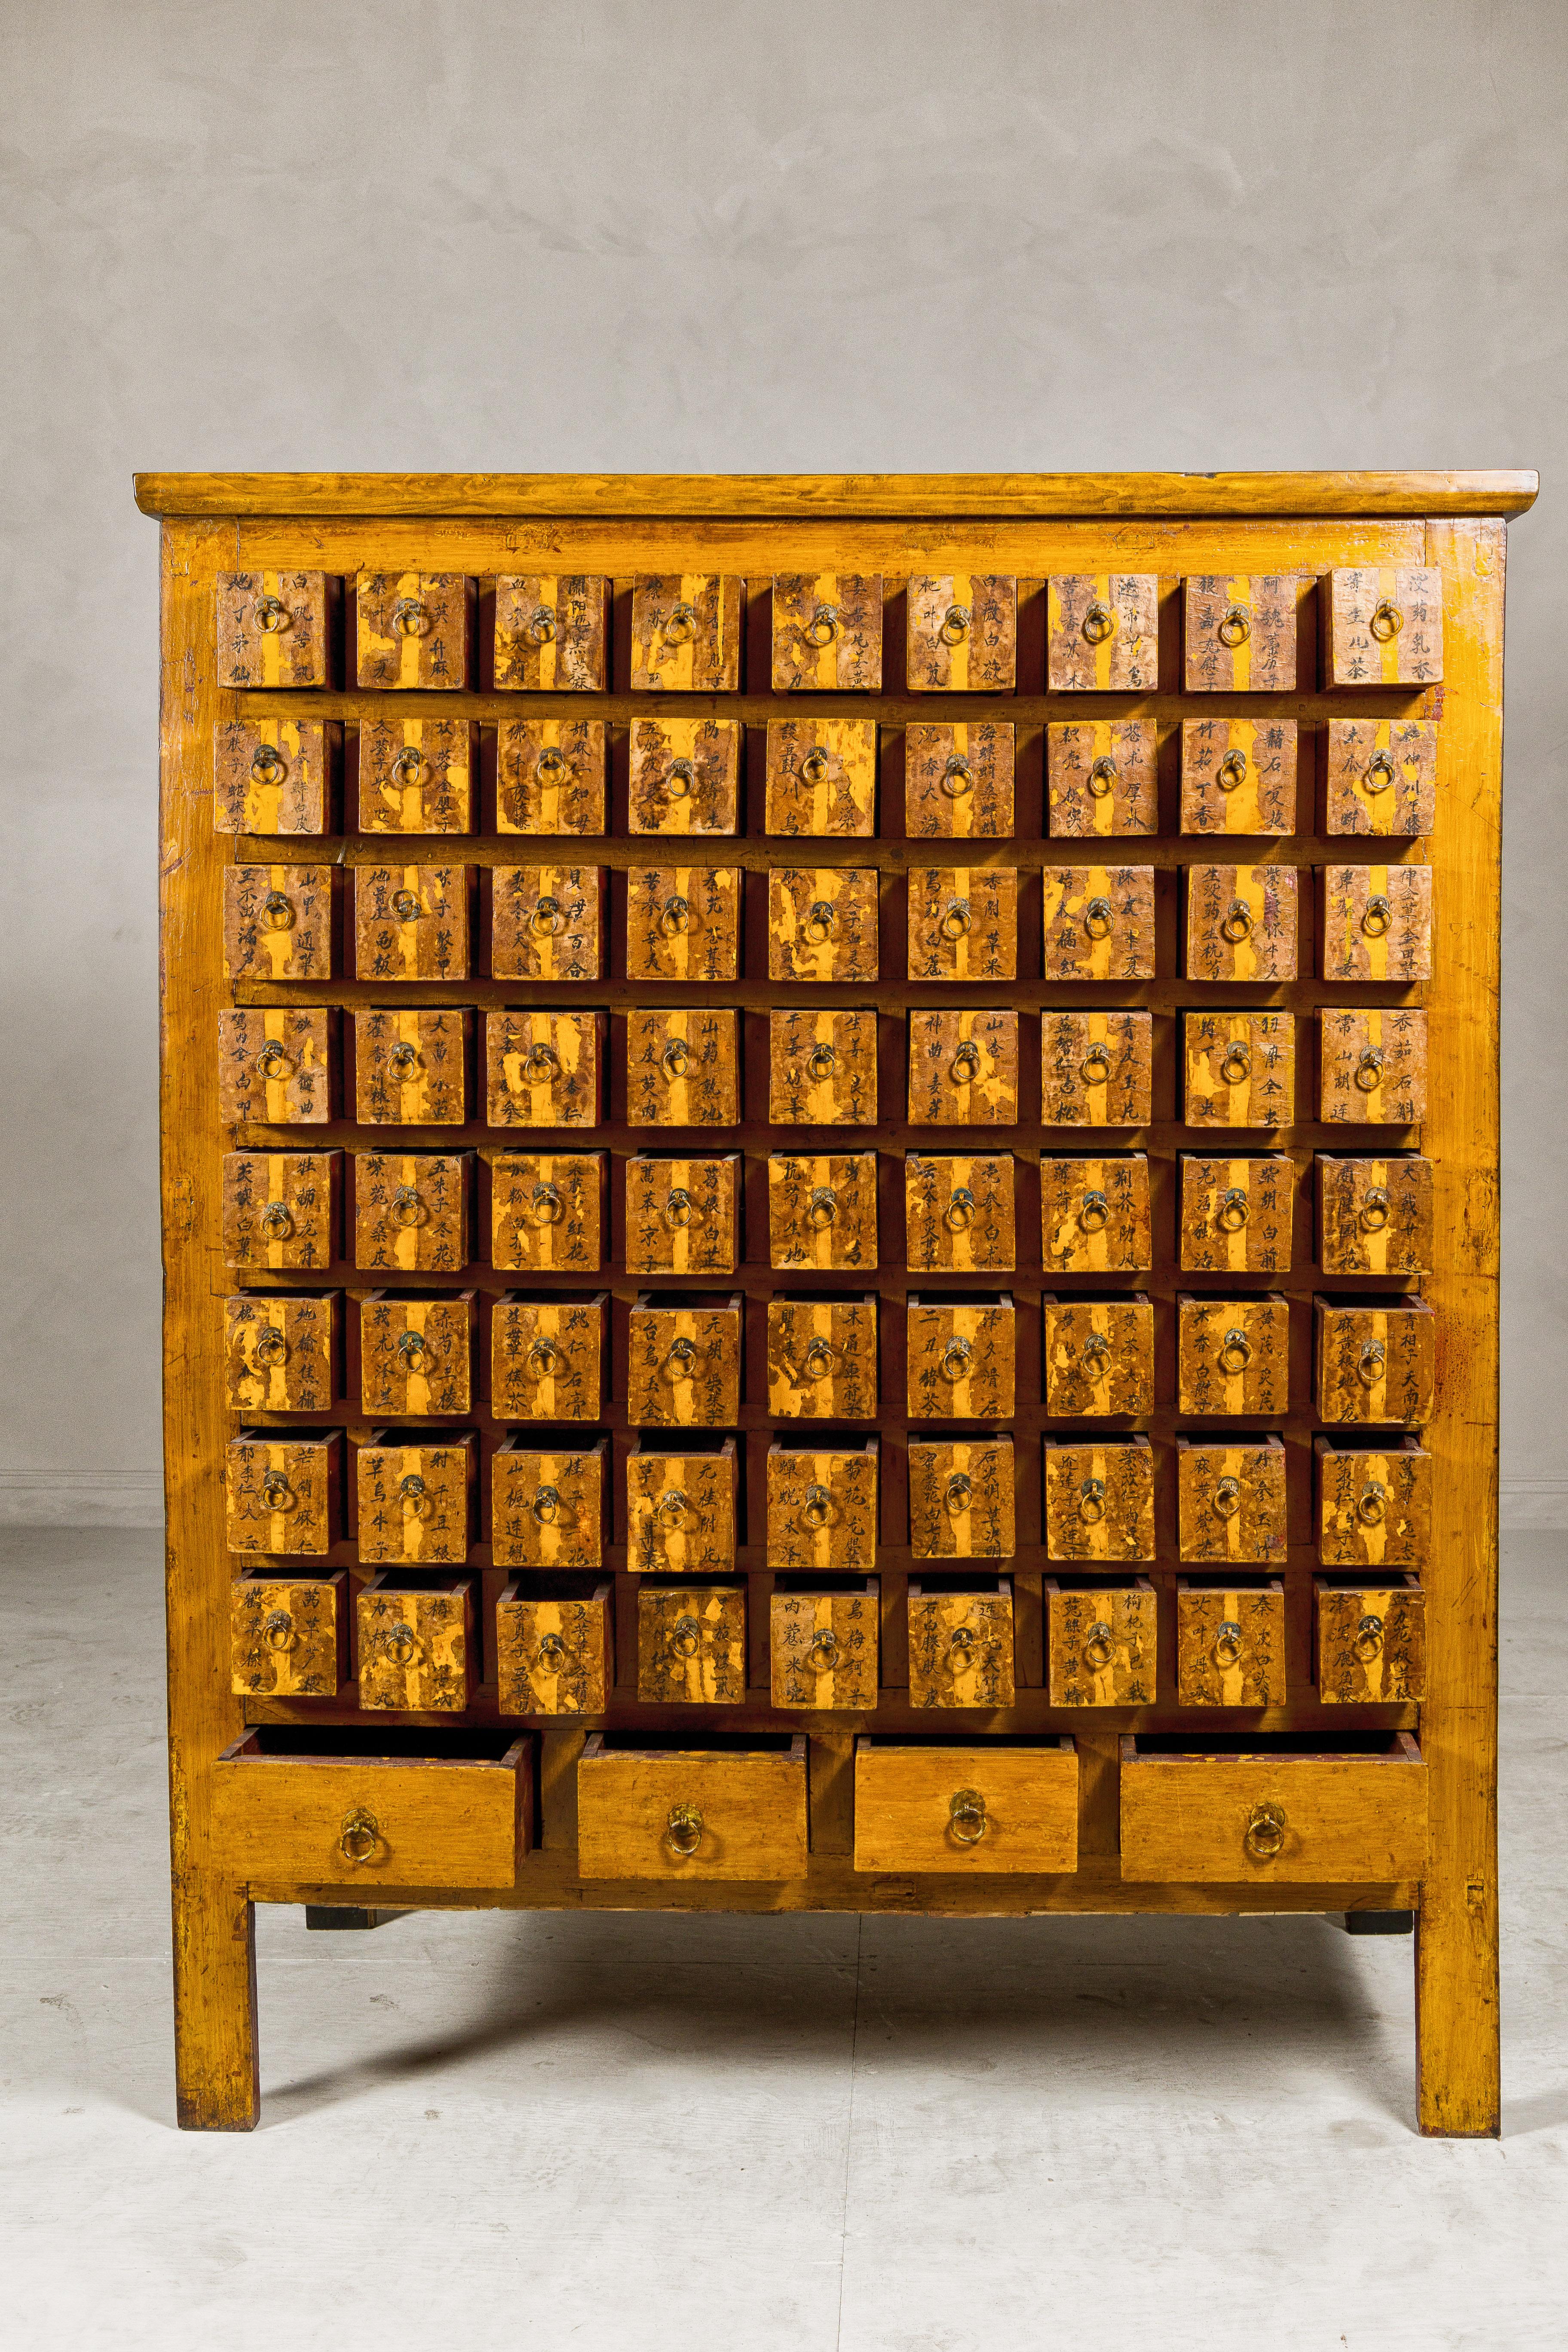 Oversized Qing Apothecary Cabinet with 76 Drawers and Chinese Calligraphy For Sale 8